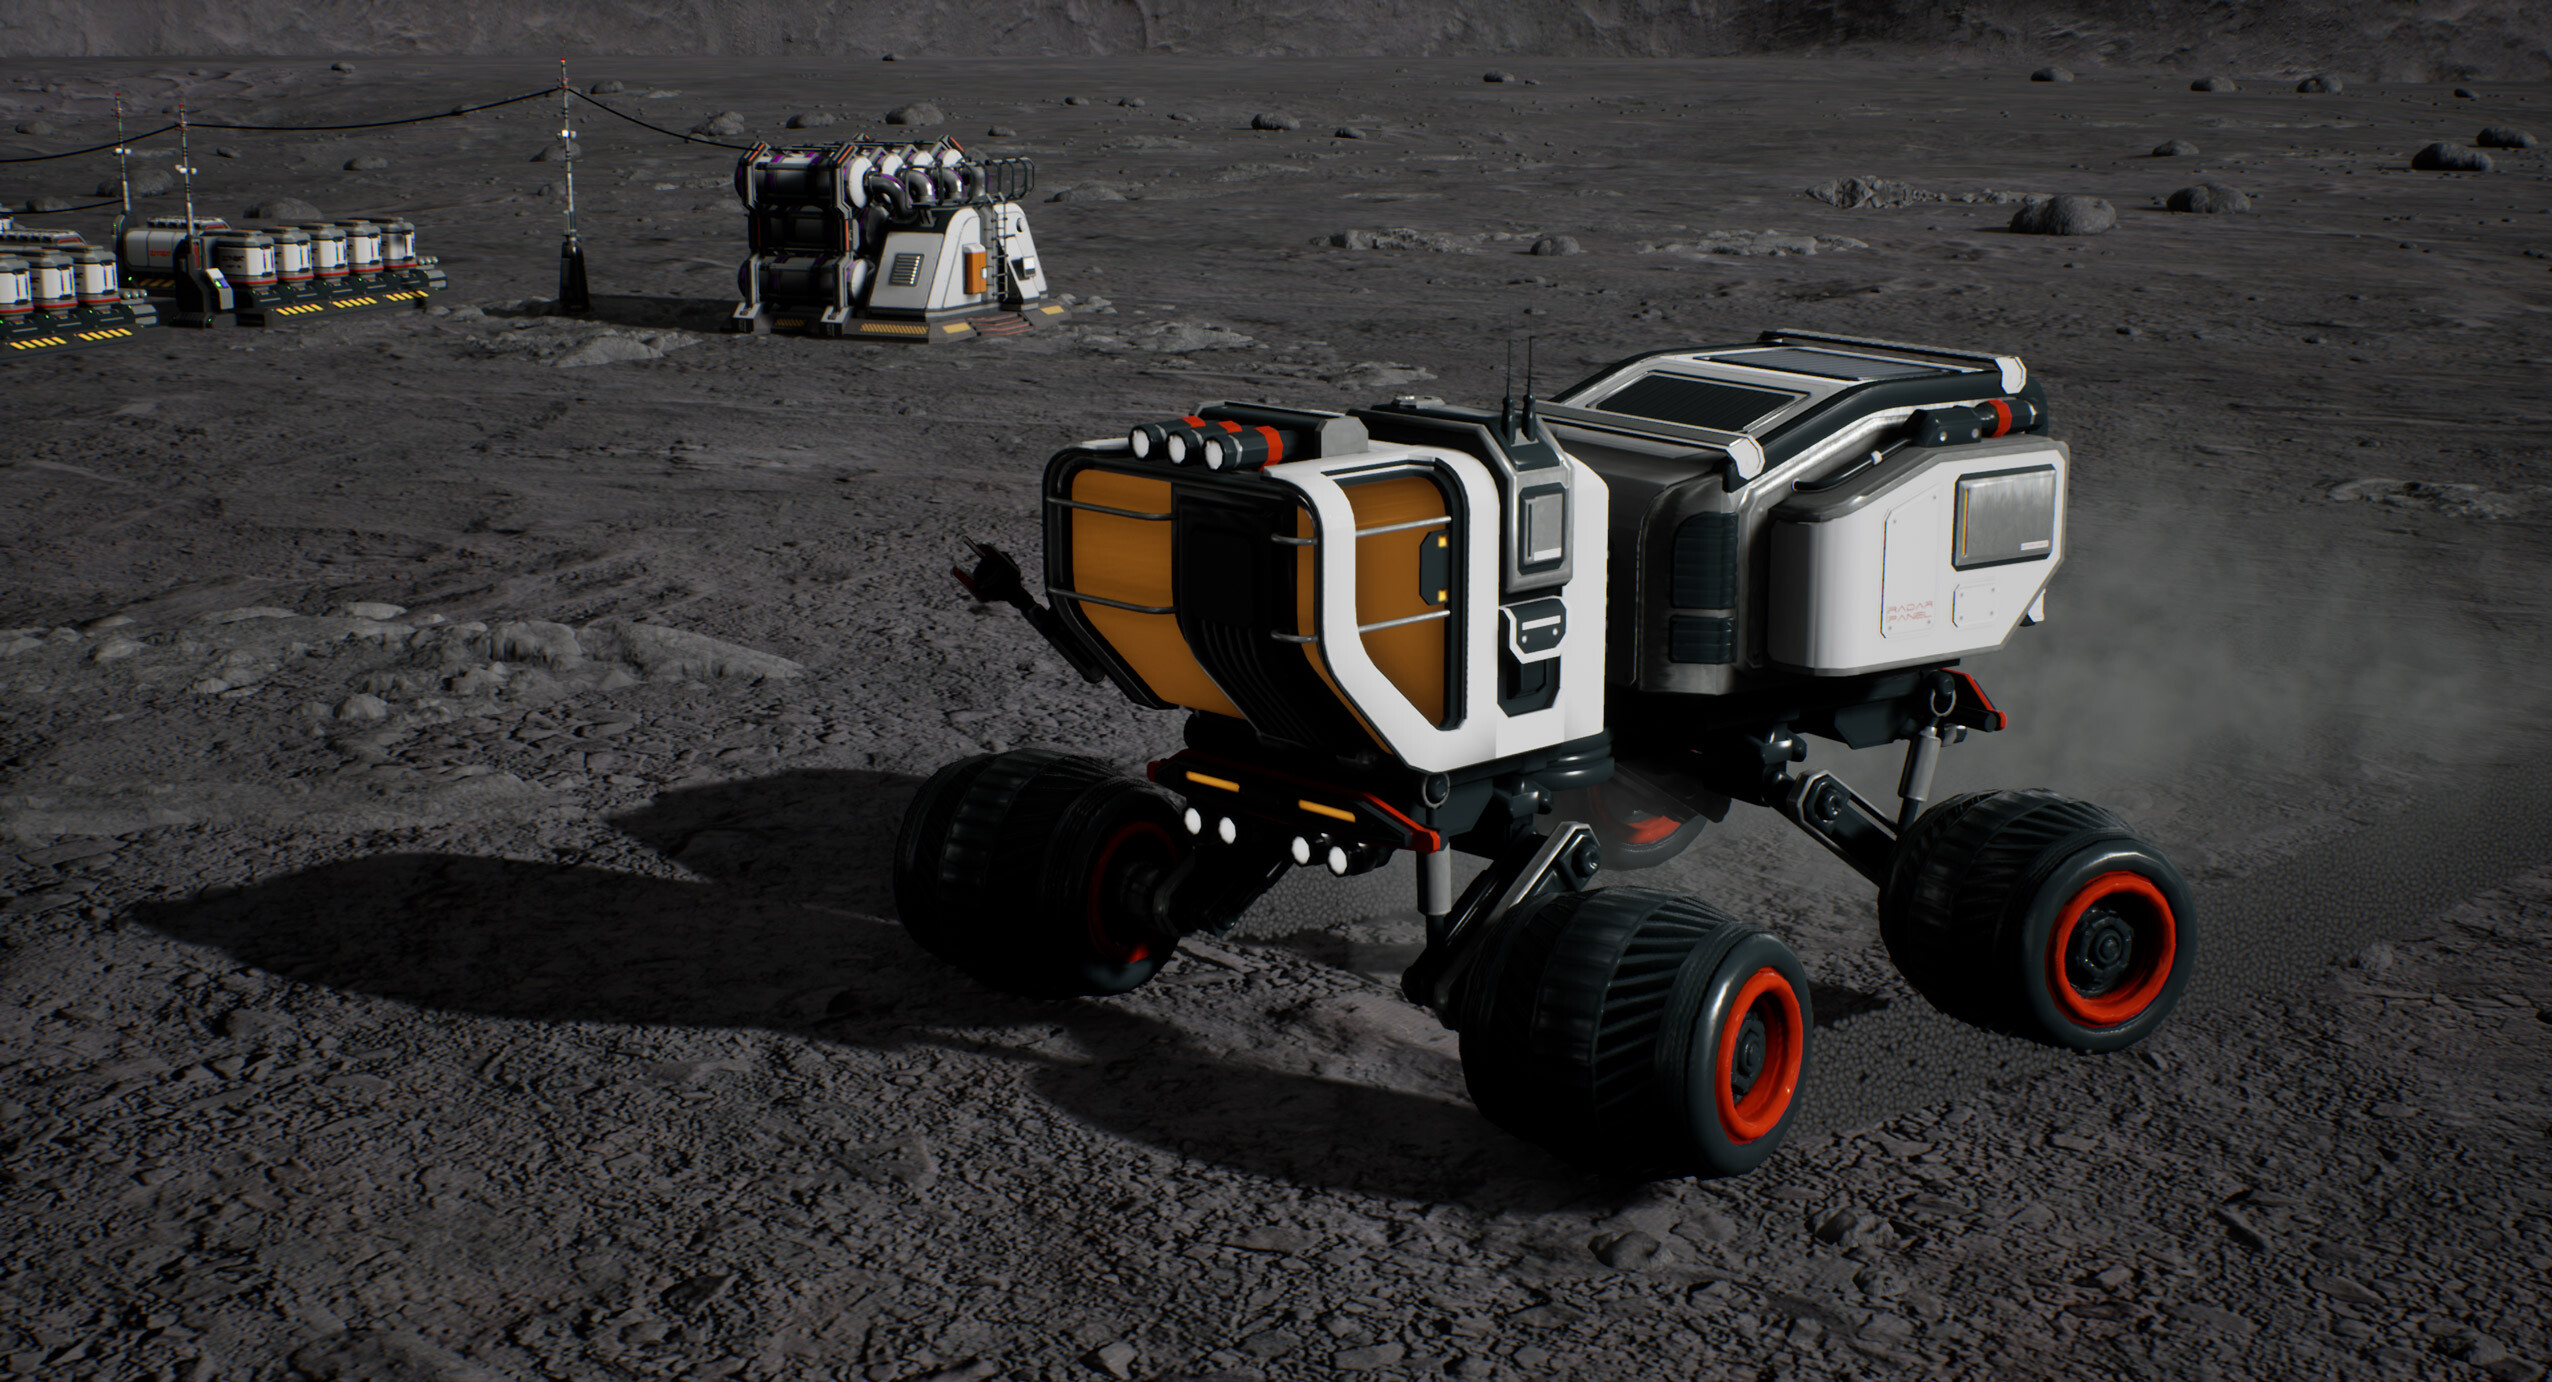  I got a little too into sorting my rocks in this game about a drone factory on the moon 